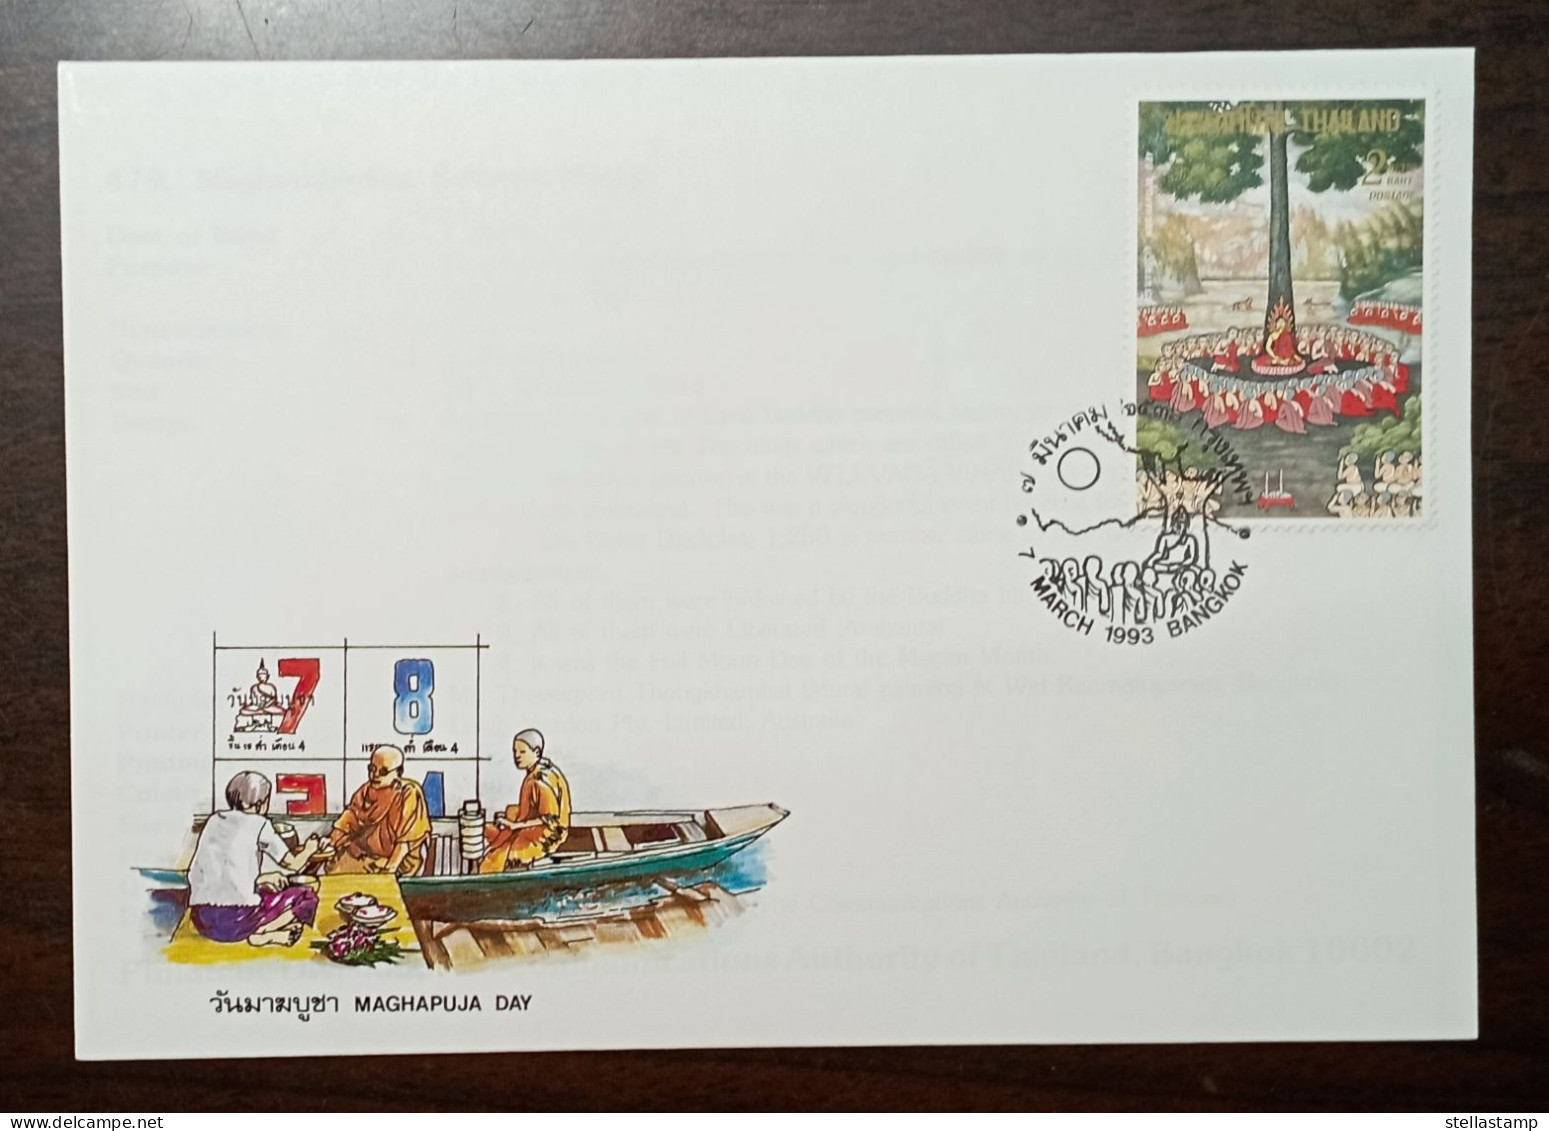 Thailand Stamp FDC 1993 Maghapuja Day - Thailand